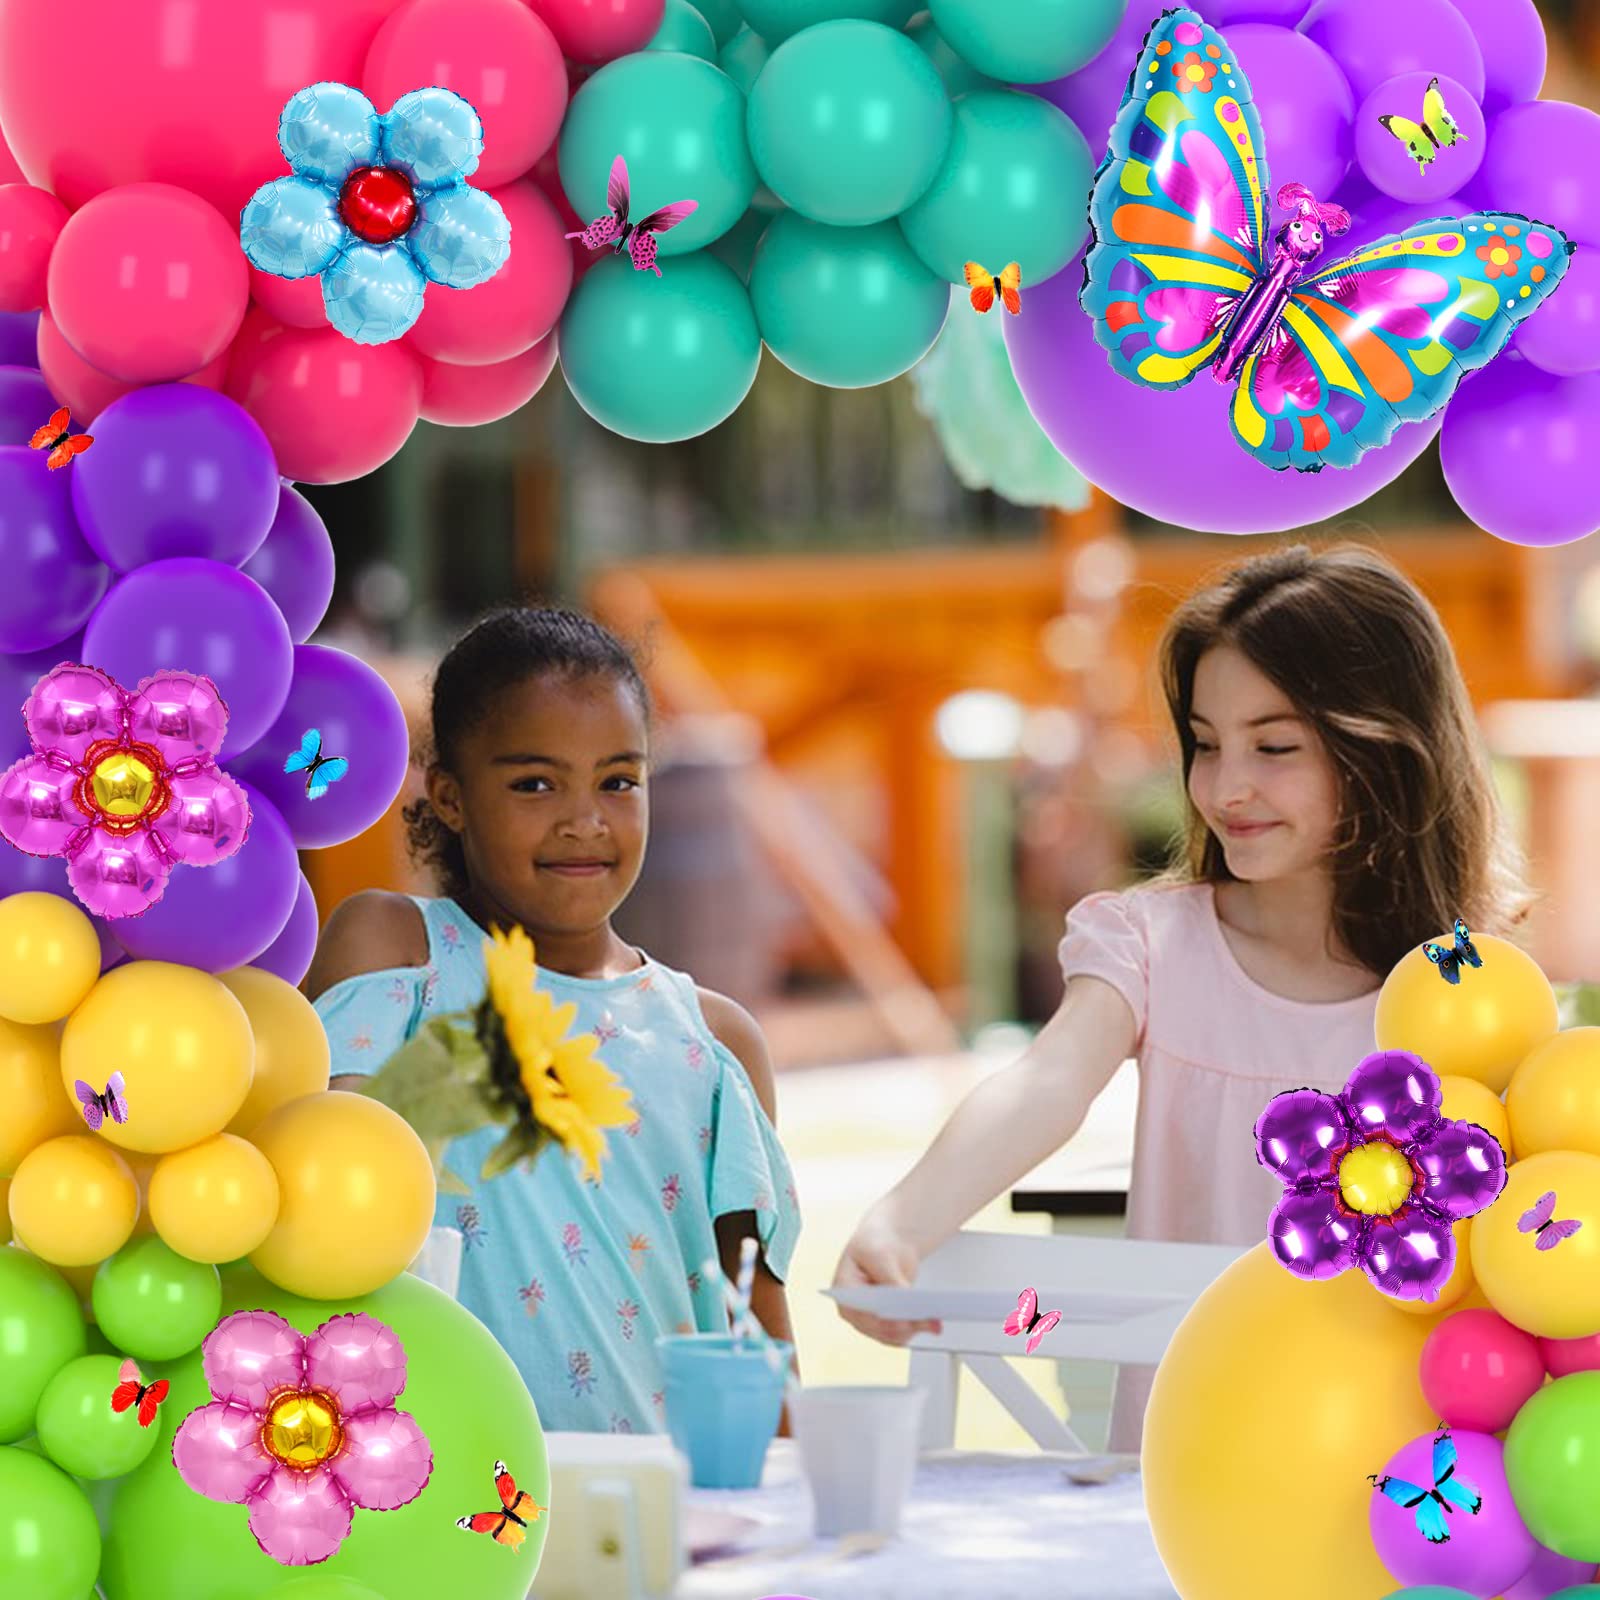 Magic Balloon Garland Kit Assorted Colors Latex Balloons Arch with Colorful Butterfly Flower Foil Balloons Butterfly Stickers for Birthday Wedding Bridal Shower Baby Shower Decorations Party Supplies